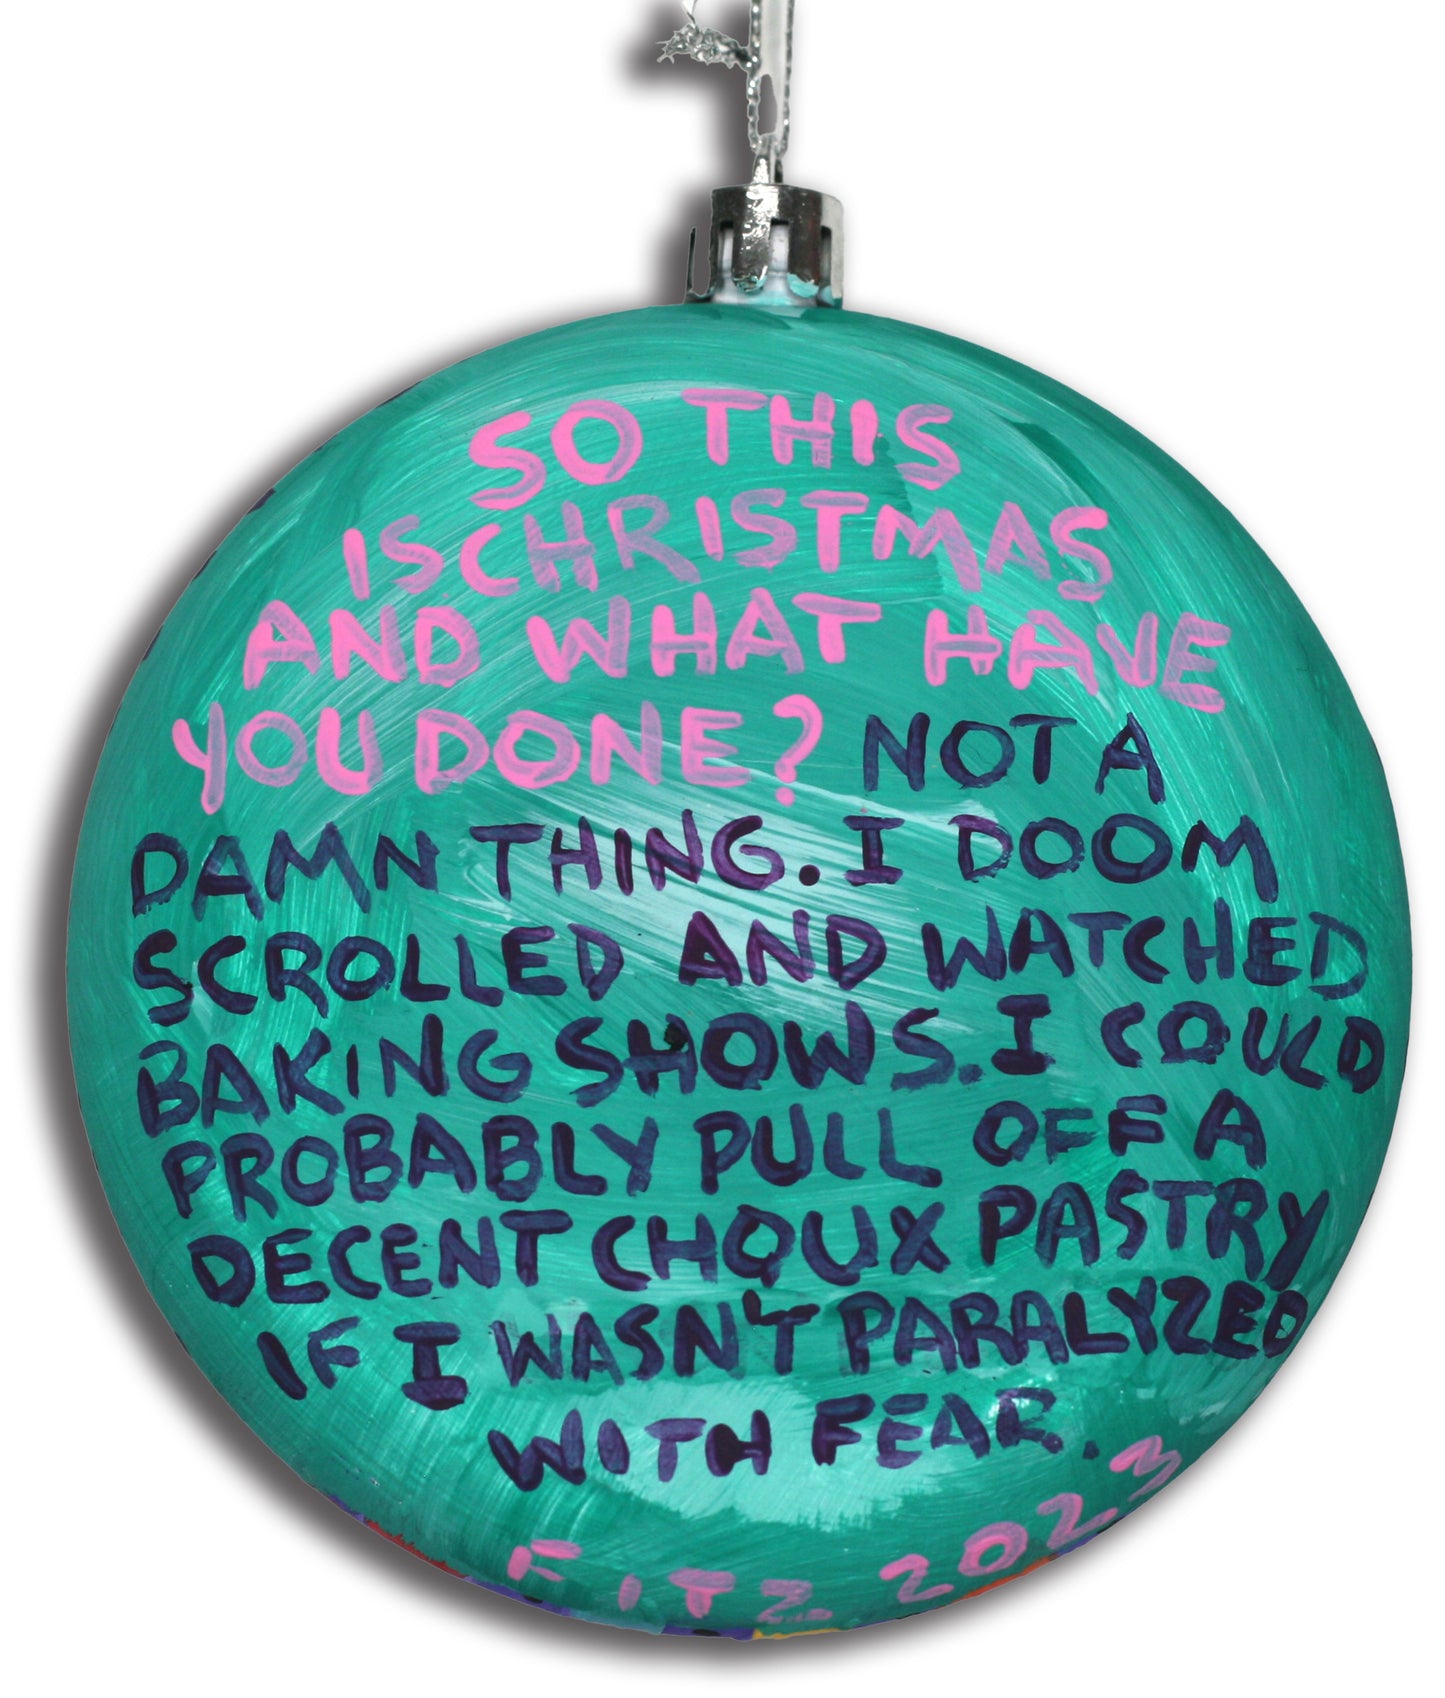 What Have You Done Christmas ornament